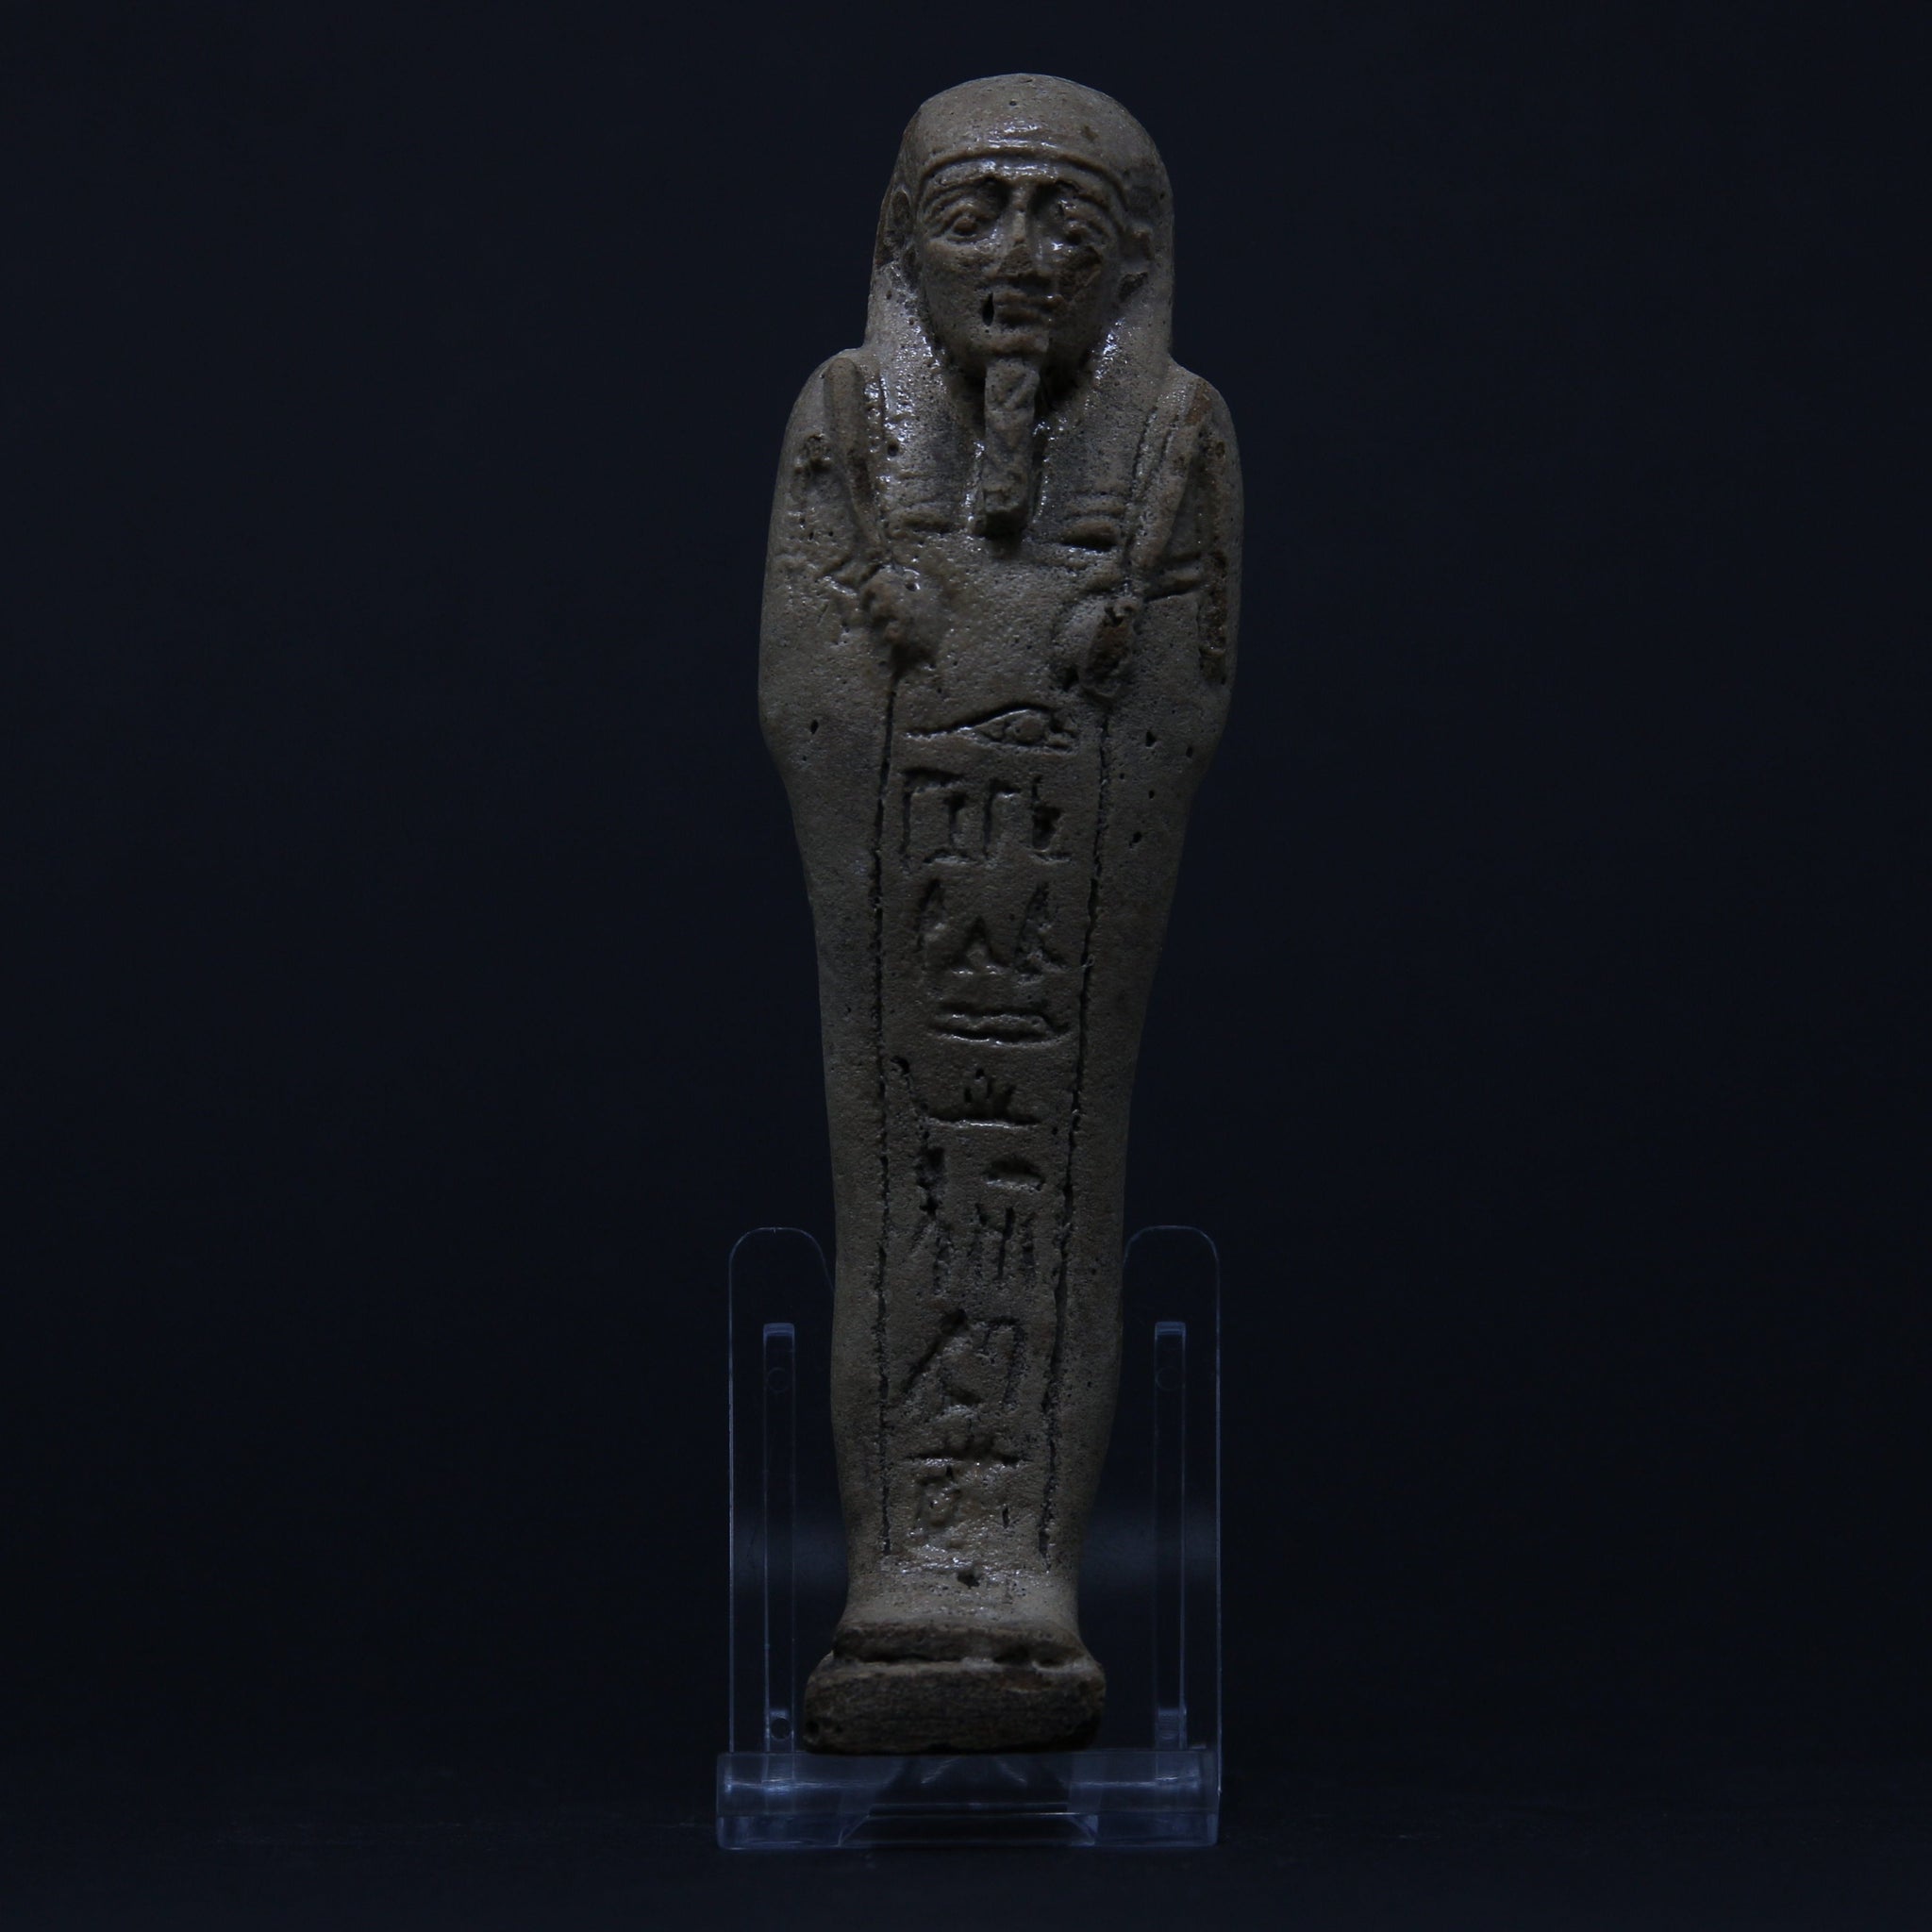 A faience shabti figure with incised inscription | Egypt, Late Dynastic Period c. 380-343 BC